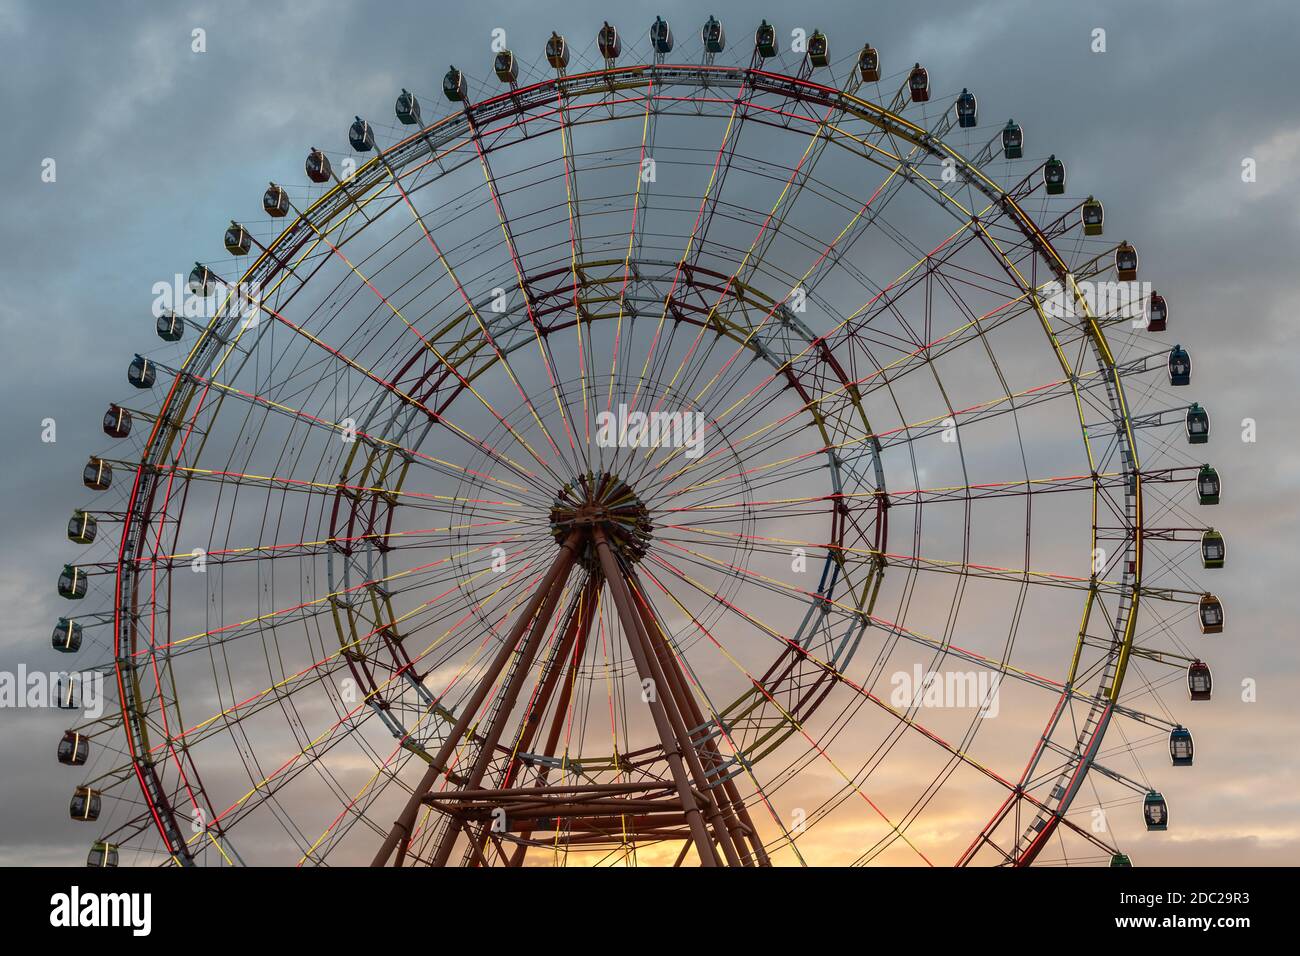 Ferris wheel against the background of a beautiful sunset sky. Stock Photo